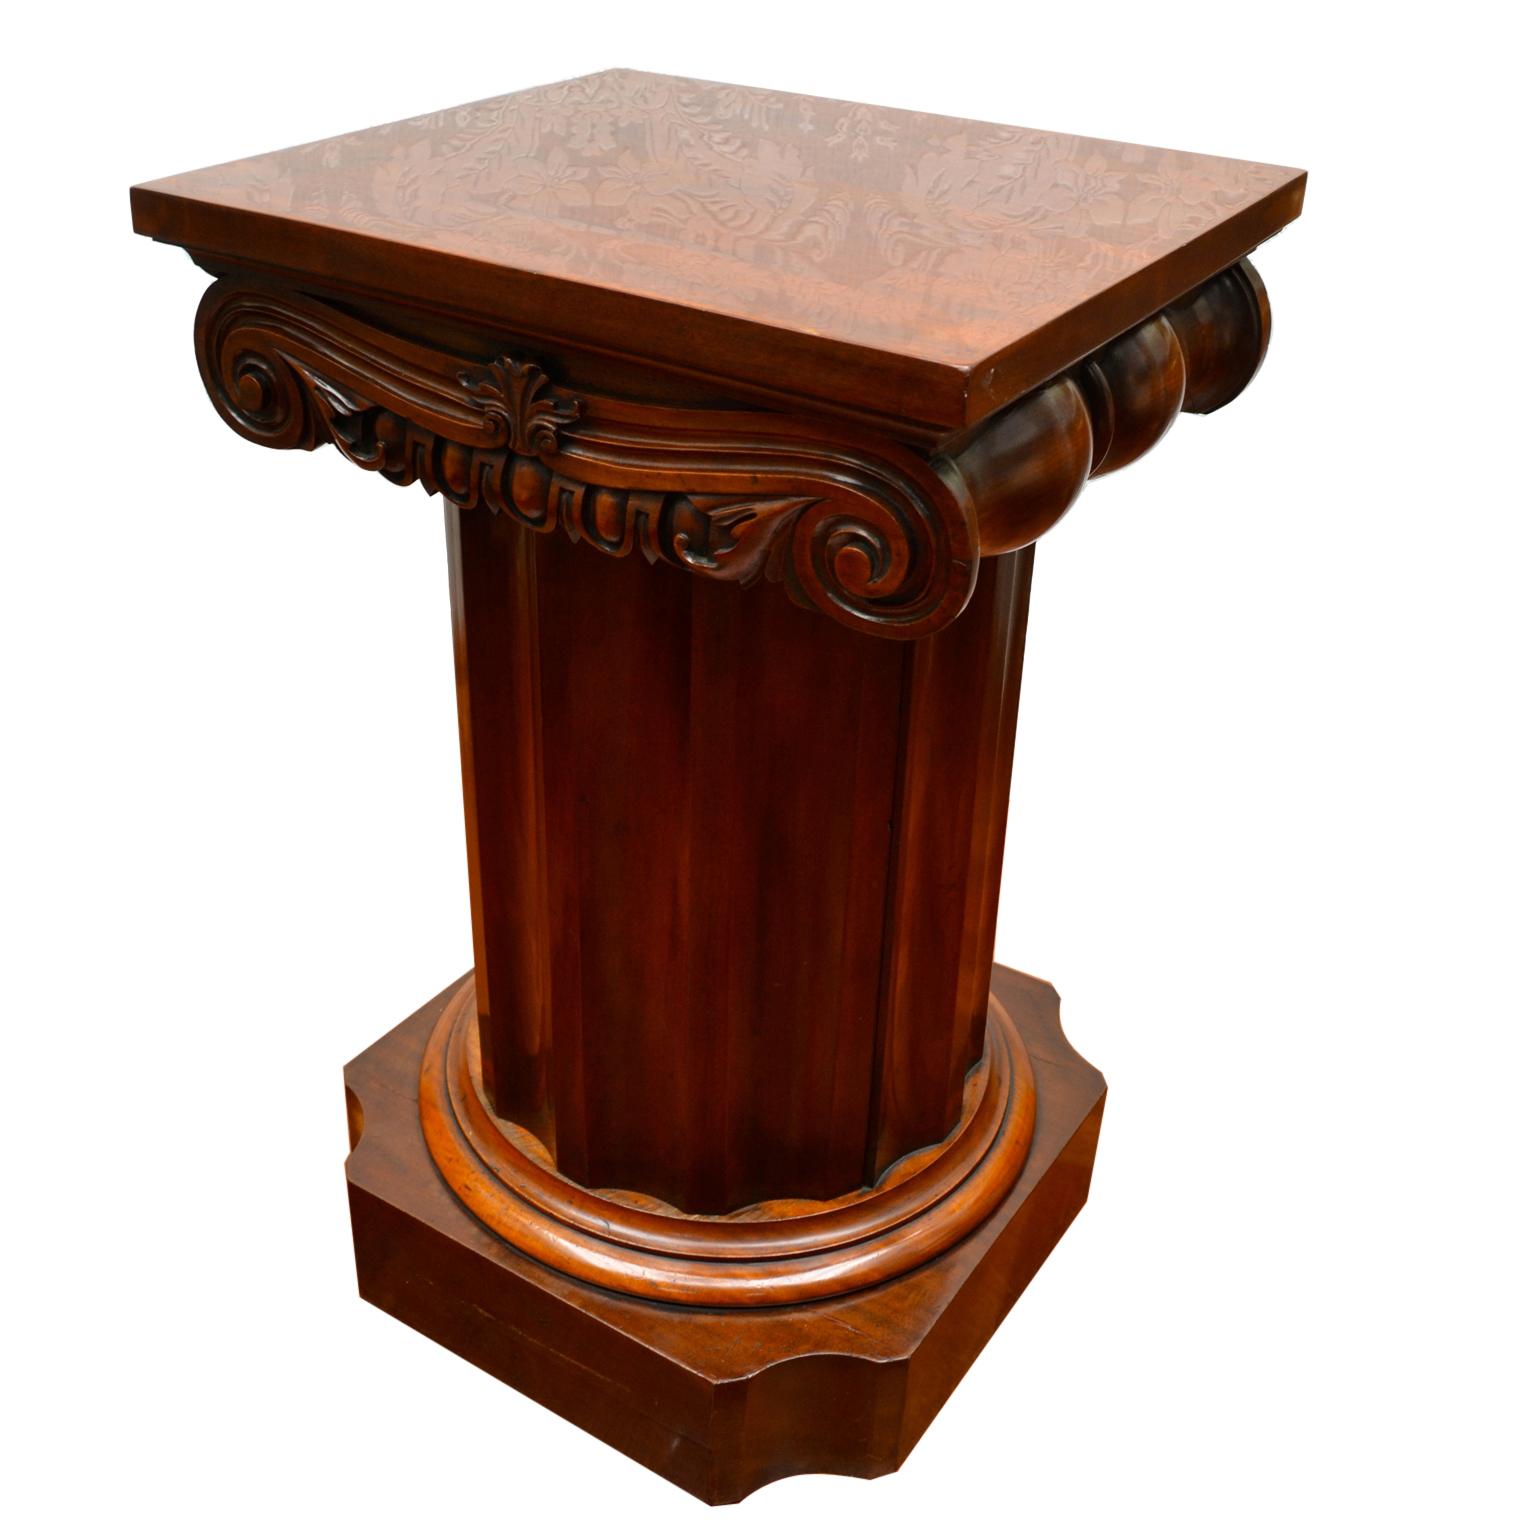 Hand-Crafted Early 19th Century English Regency Mahogany Bedside Table or 'Somno'